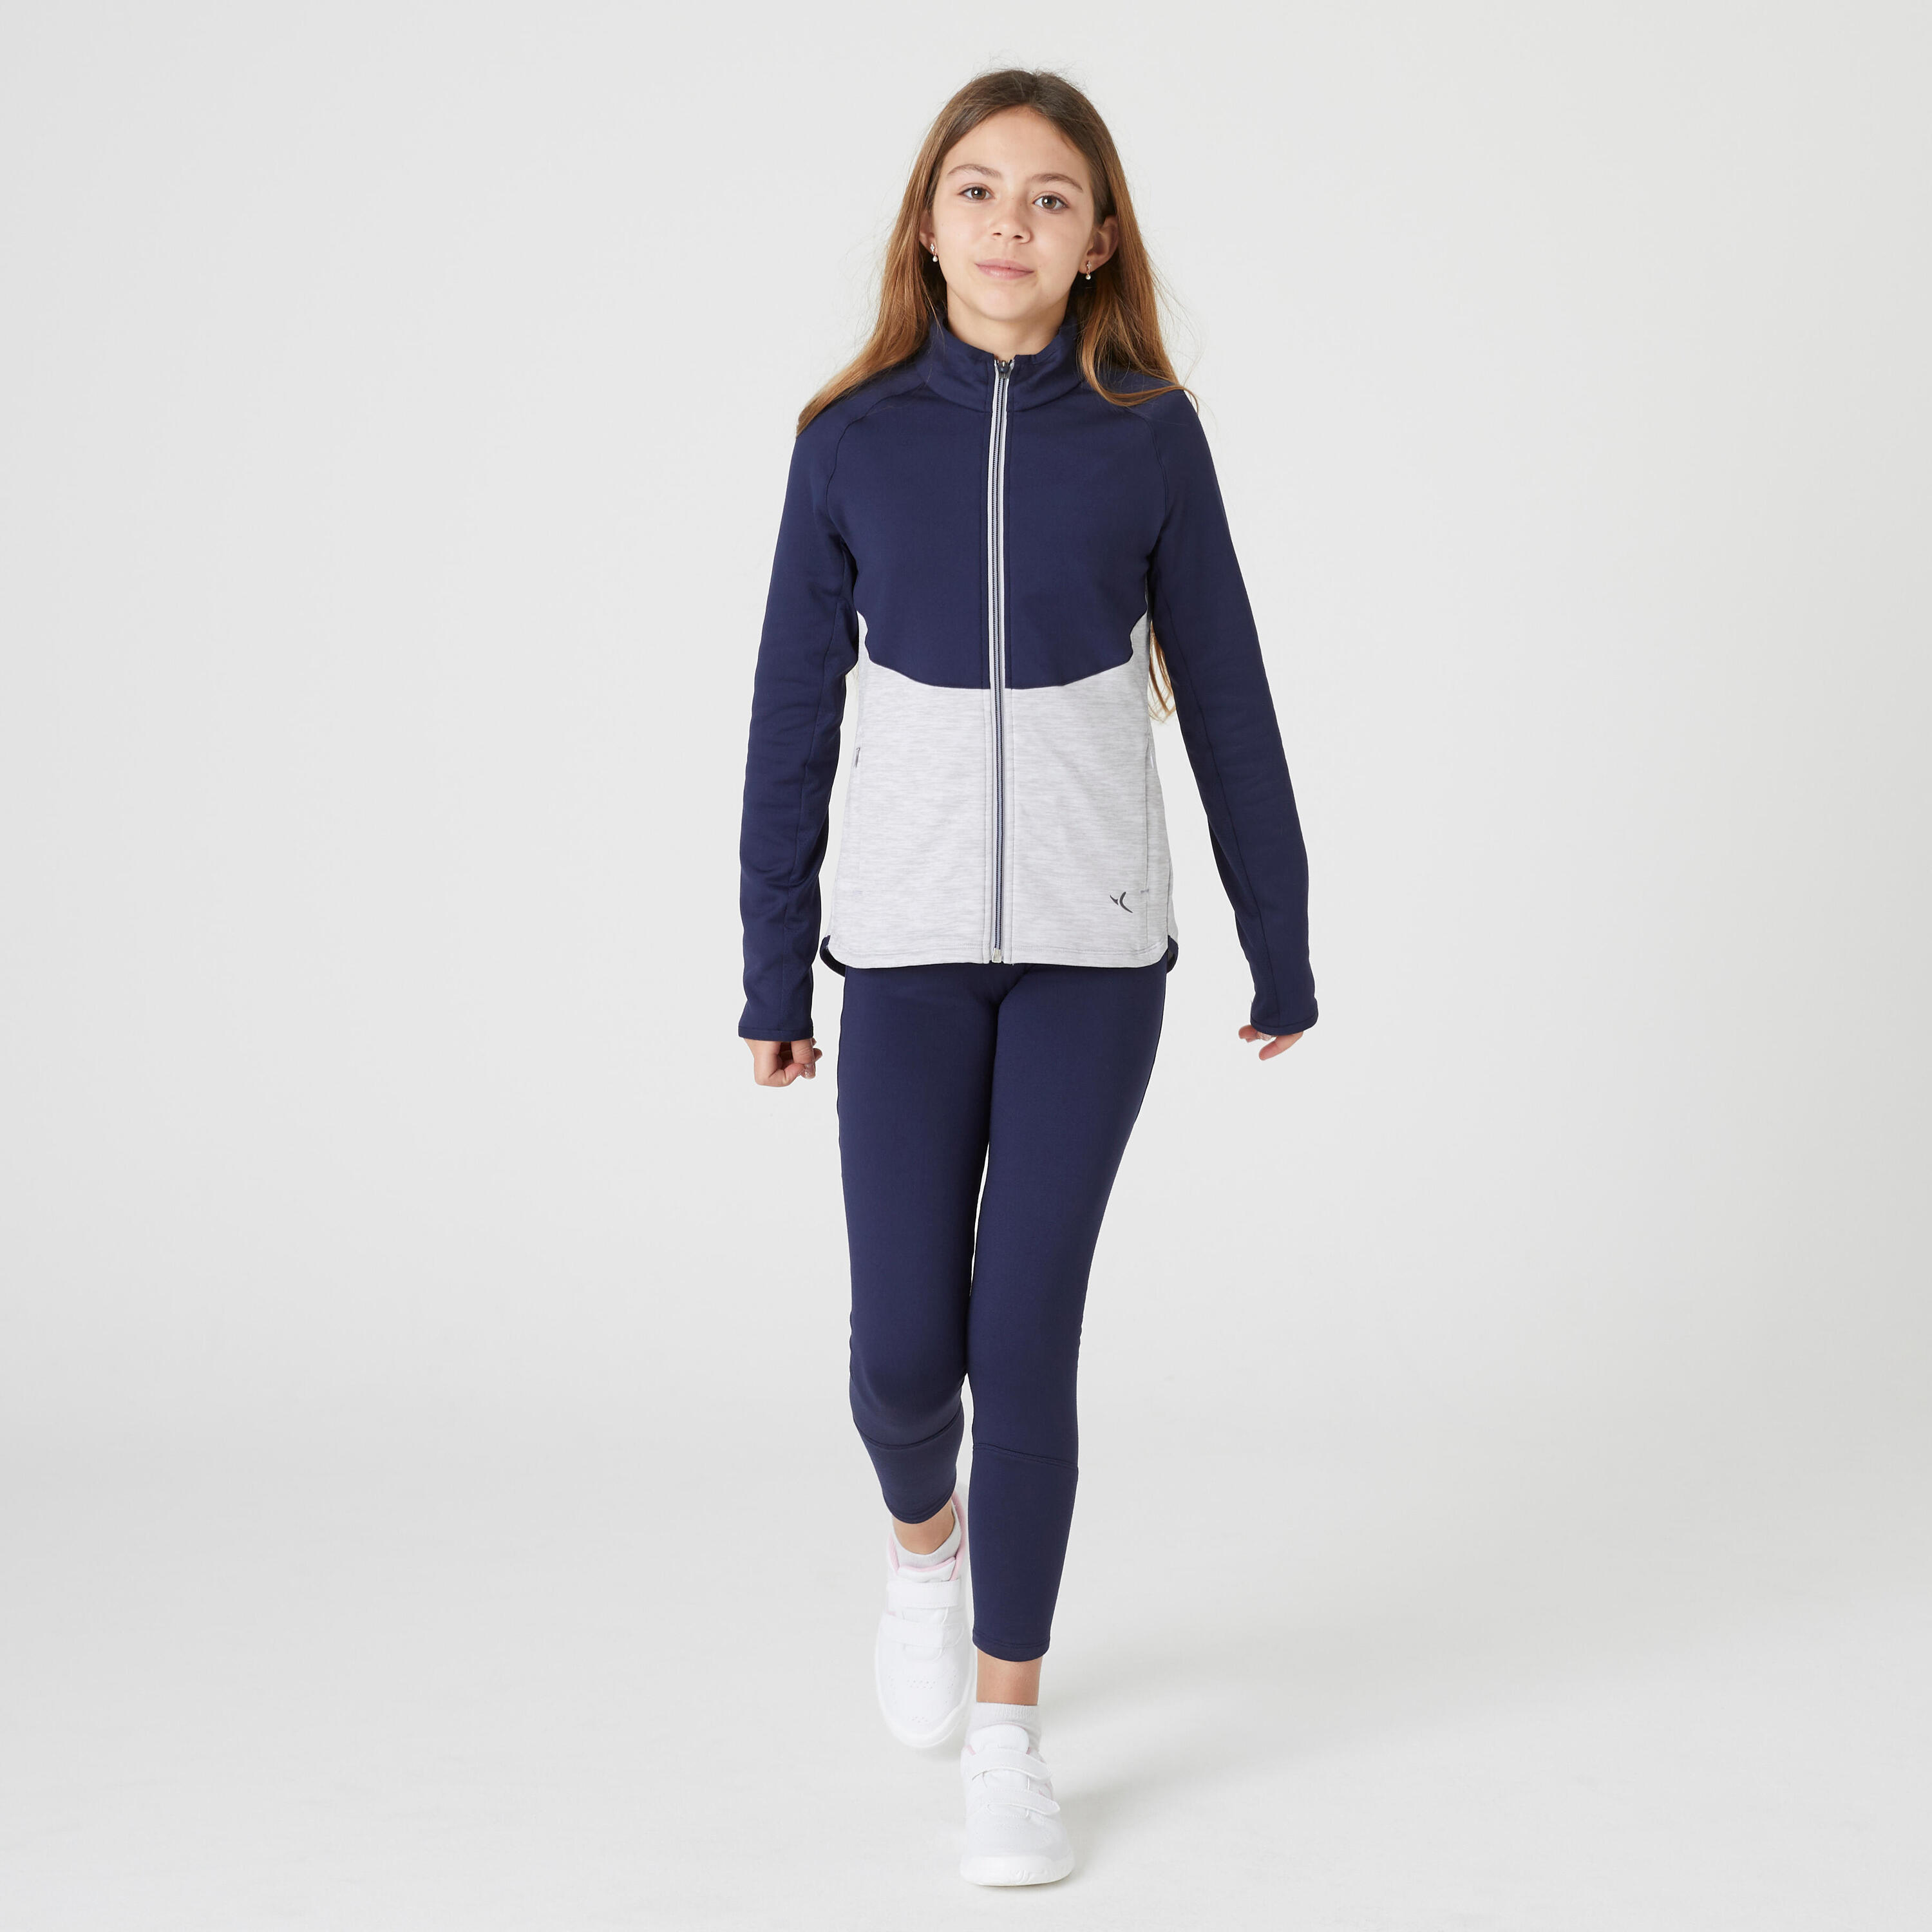 DOMYOS Kids' Breathable Tracksuit S500 - Navy/Light Grey